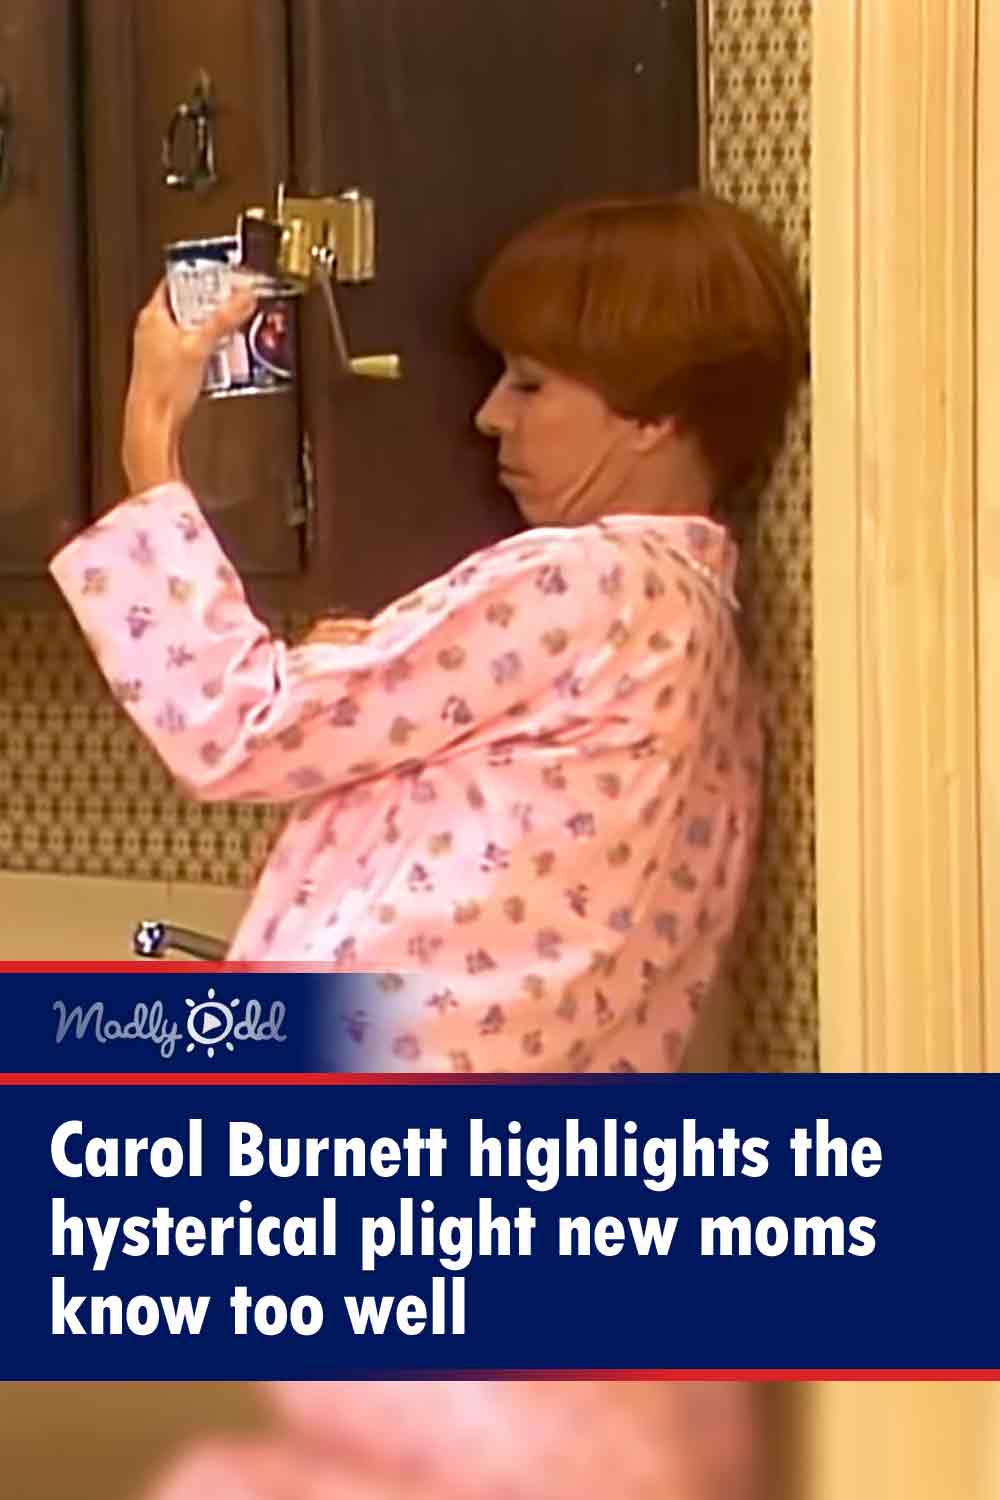 Carol Burnett highlights the hysterical plight new moms know too well